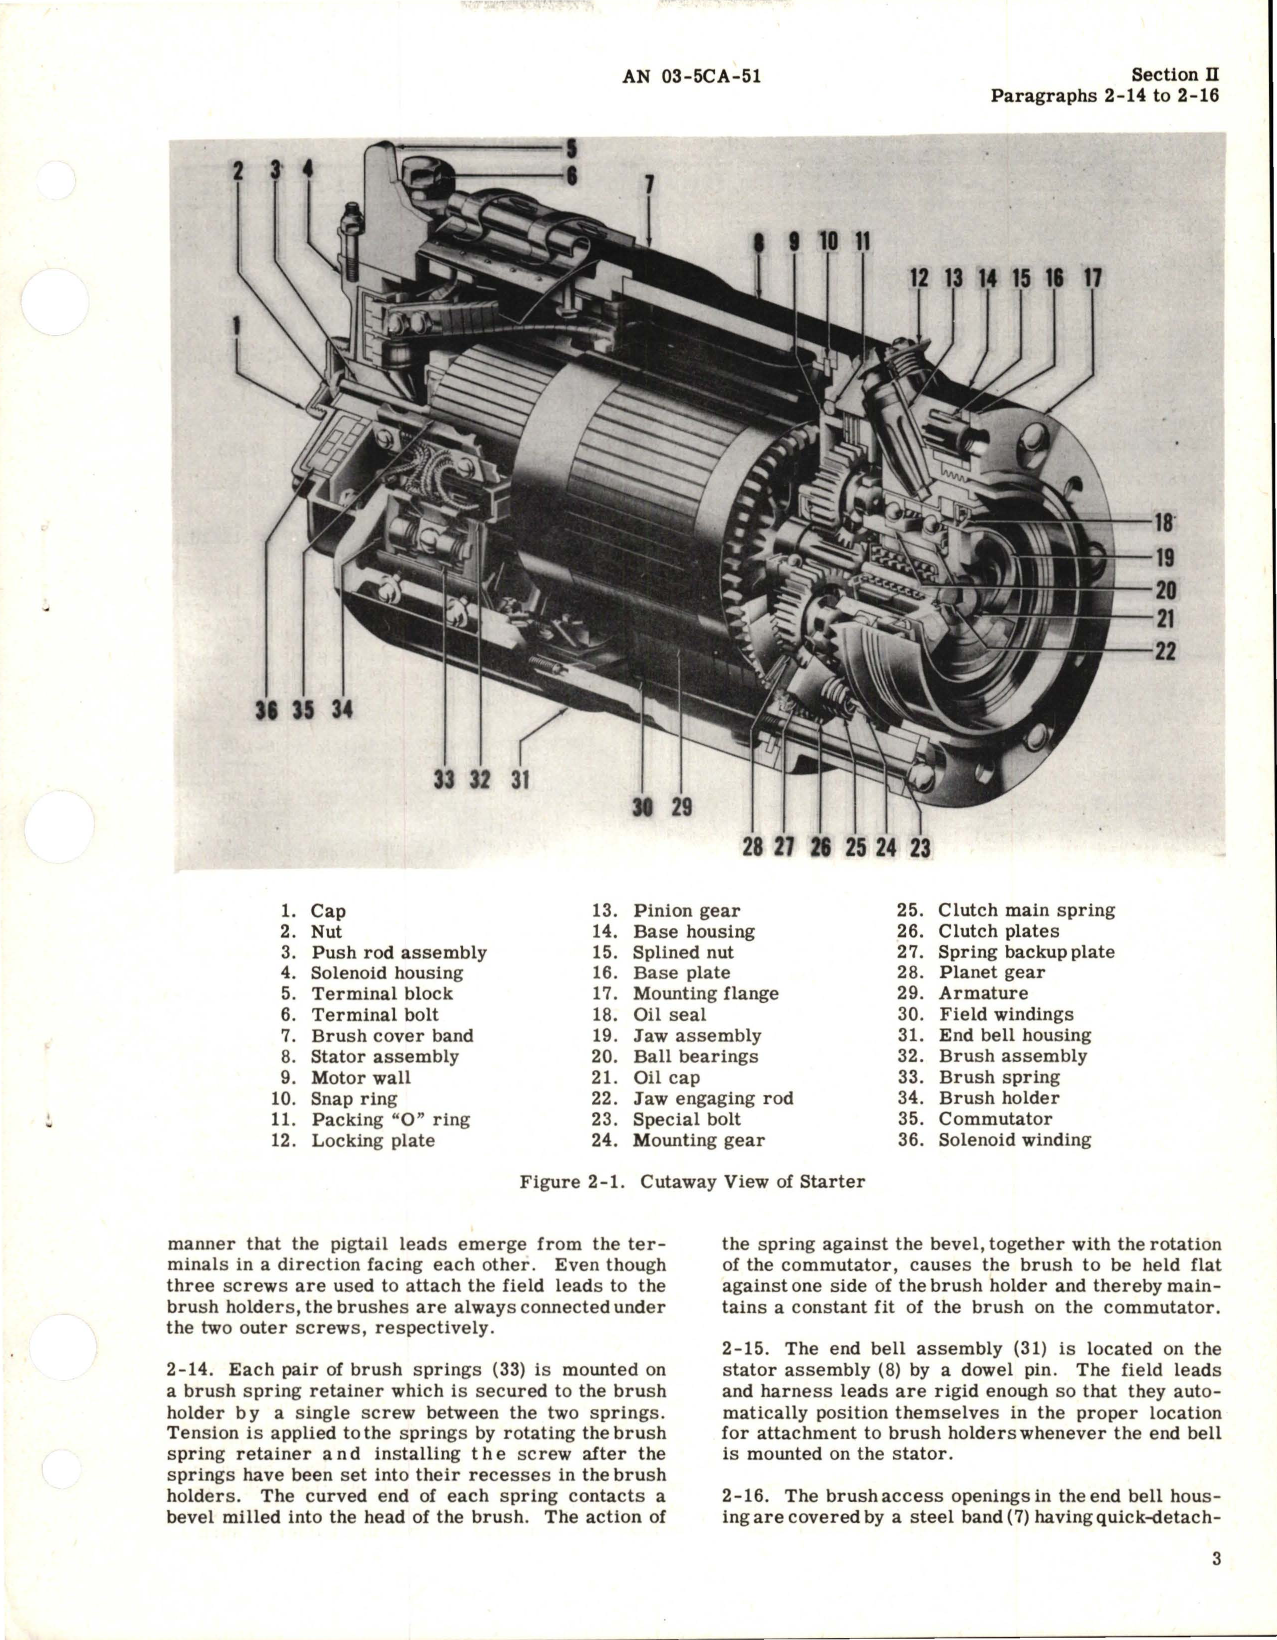 Sample page 7 from AirCorps Library document: Operation and Service Instructions for Electric Starters